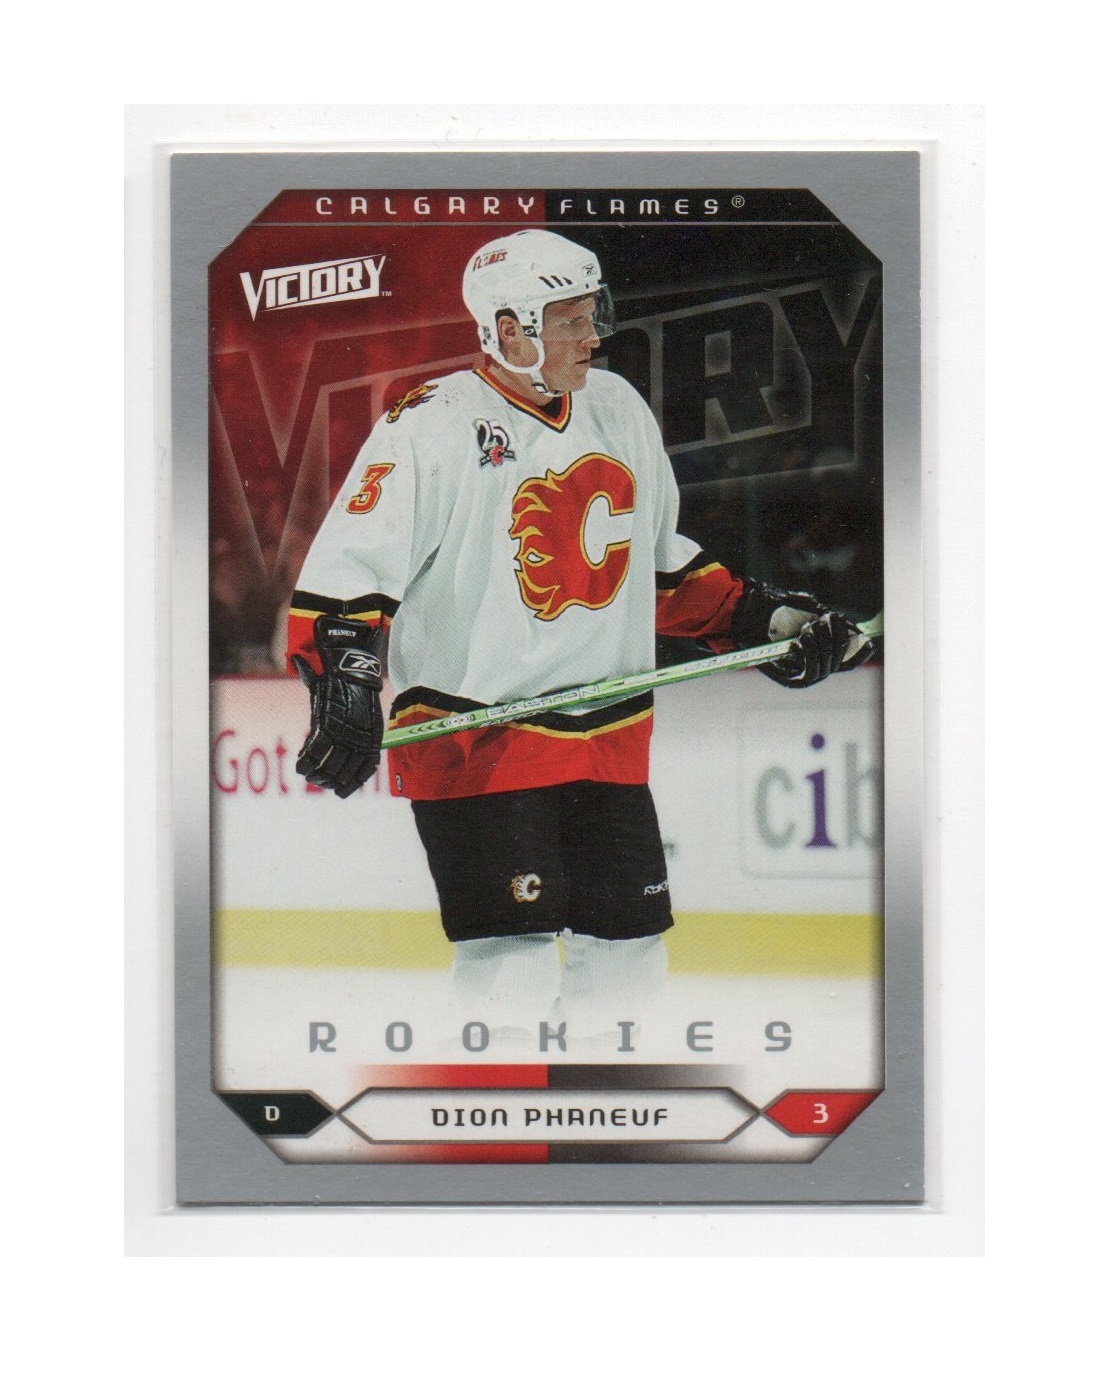 2005-06 Upper Deck Victory #269 Dion Phaneuf RC (10-X235-RC-FLAMES)